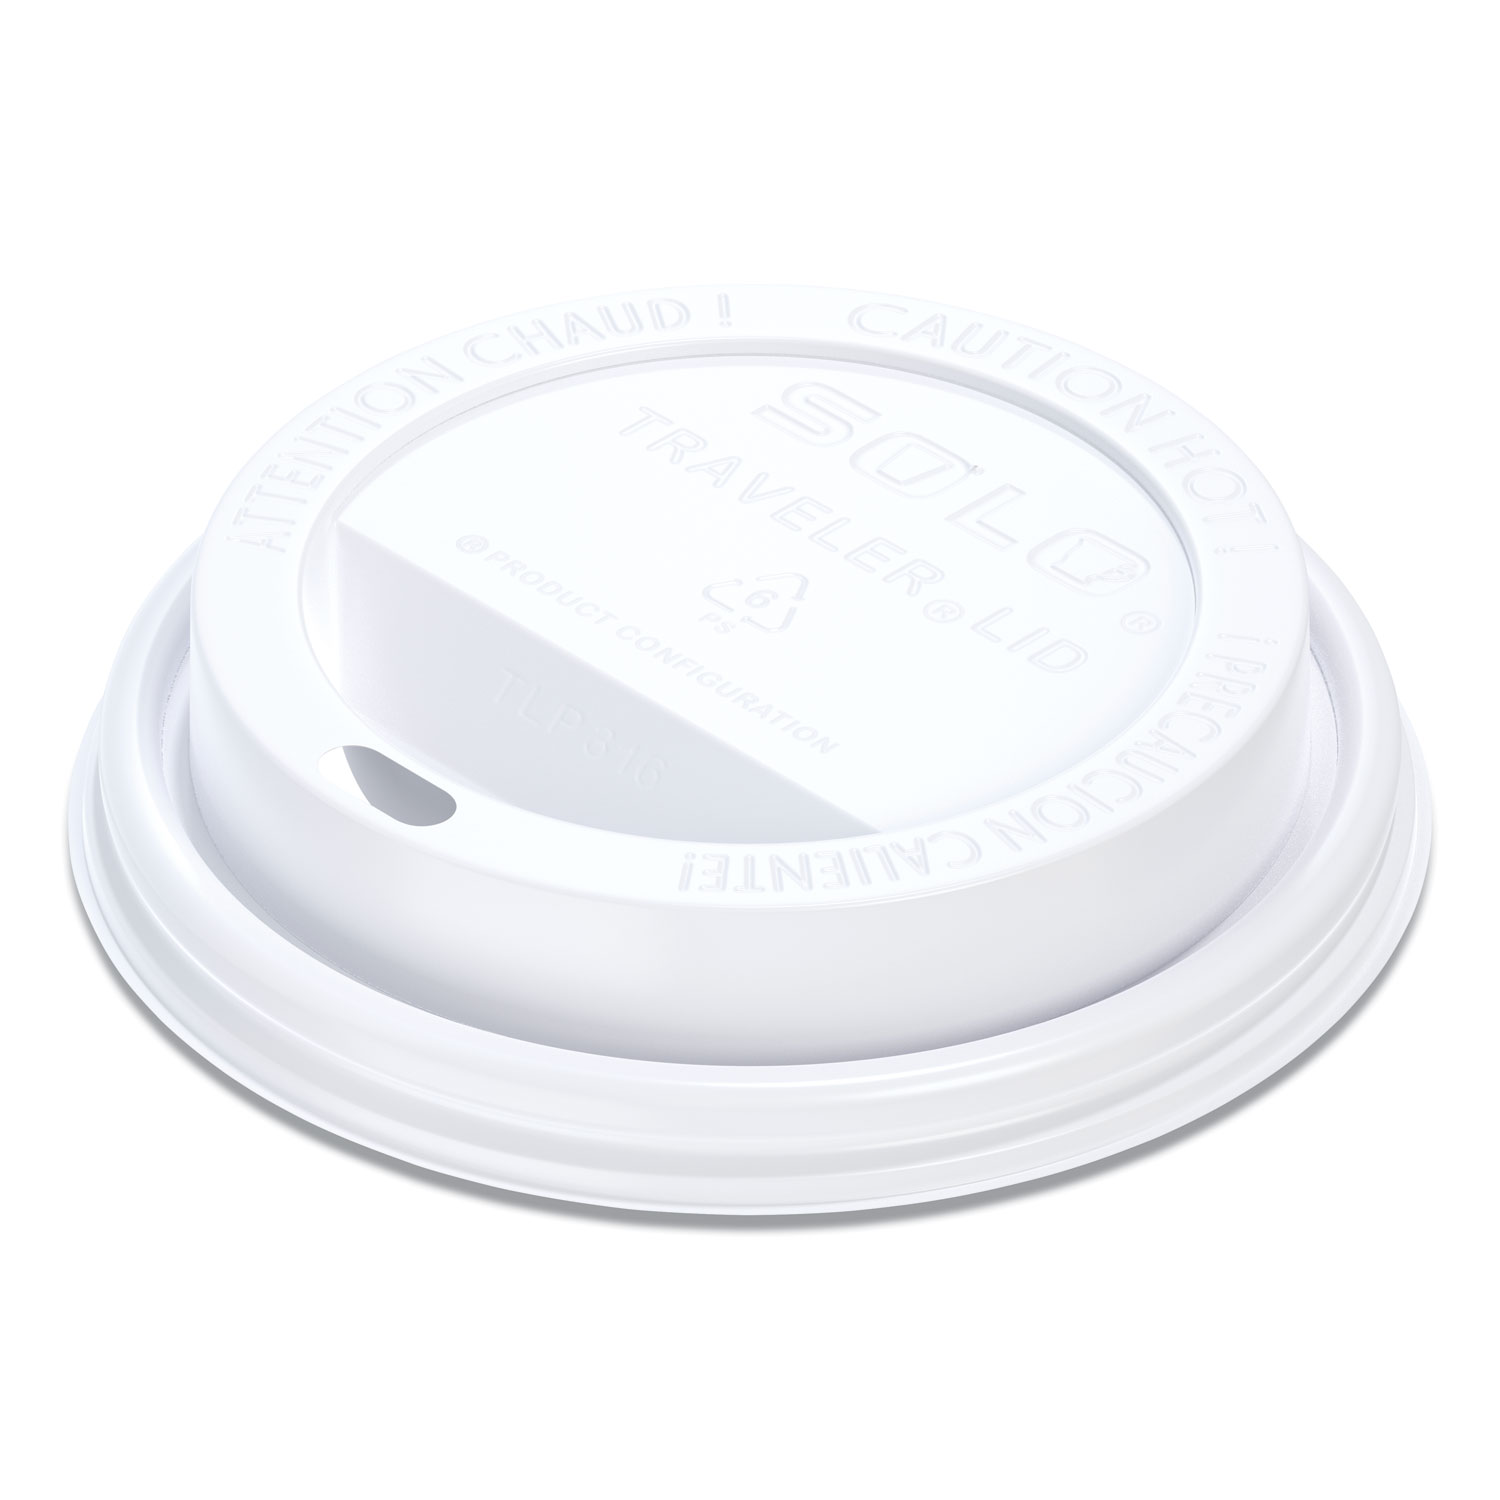 Dart® Traveler Cappuccino Style Dome Lid, Polystyrene, Fits 10-24 oz Hot Cups, White, 100/Pack